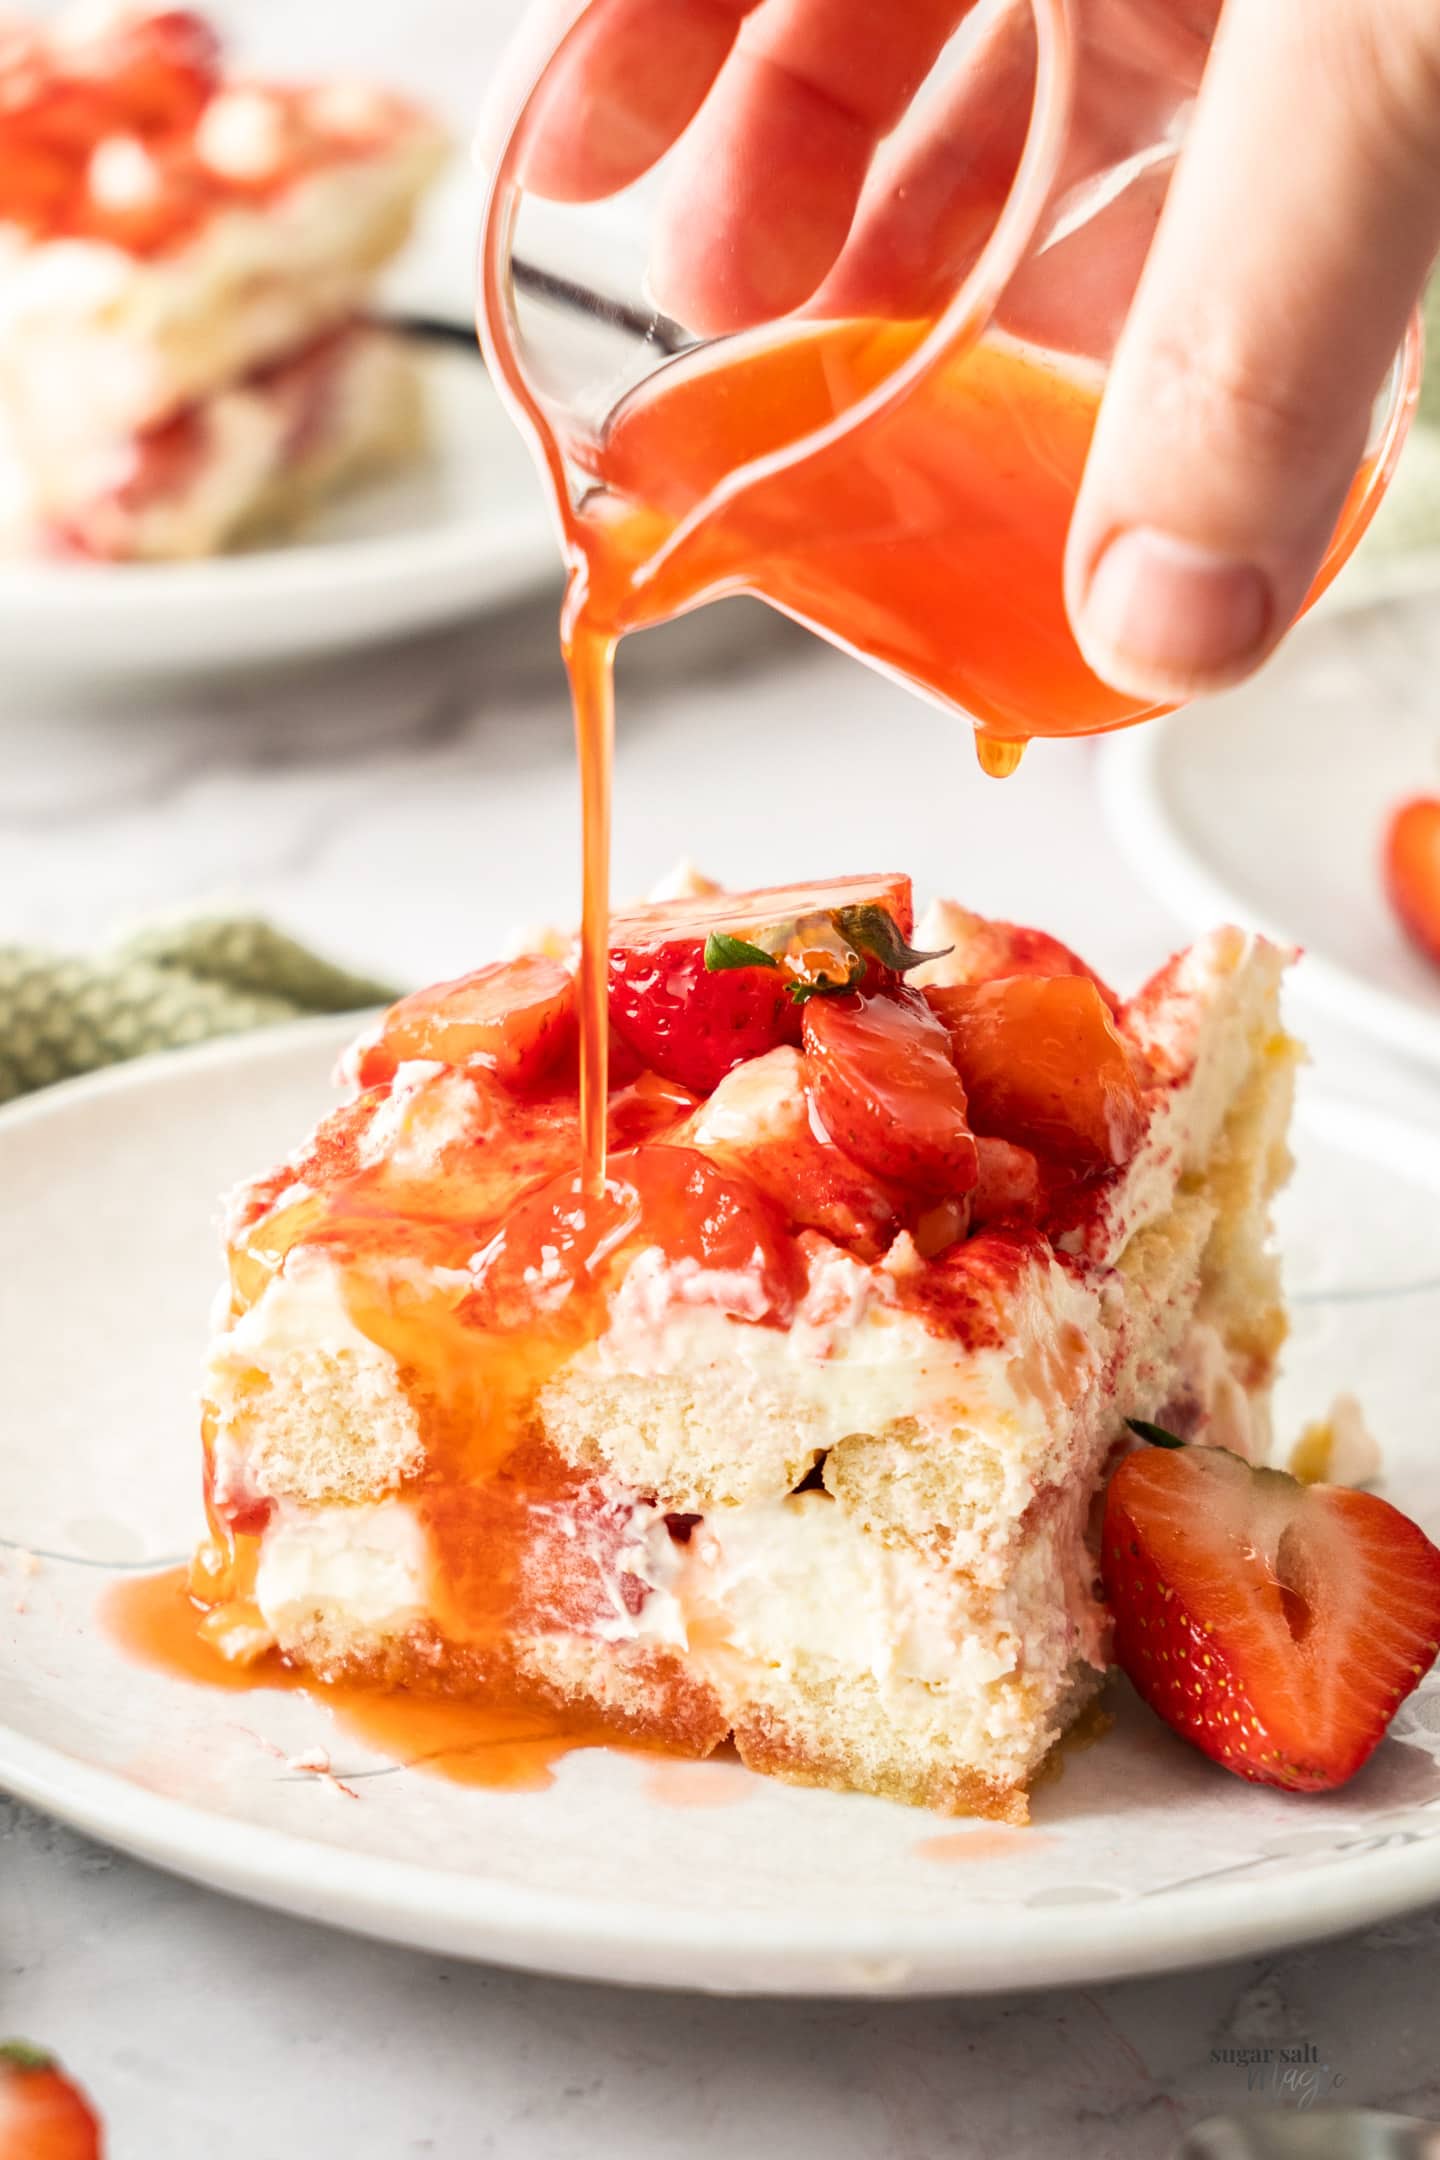 A slice of strawberry tiramisu with syrup being poured over the top.